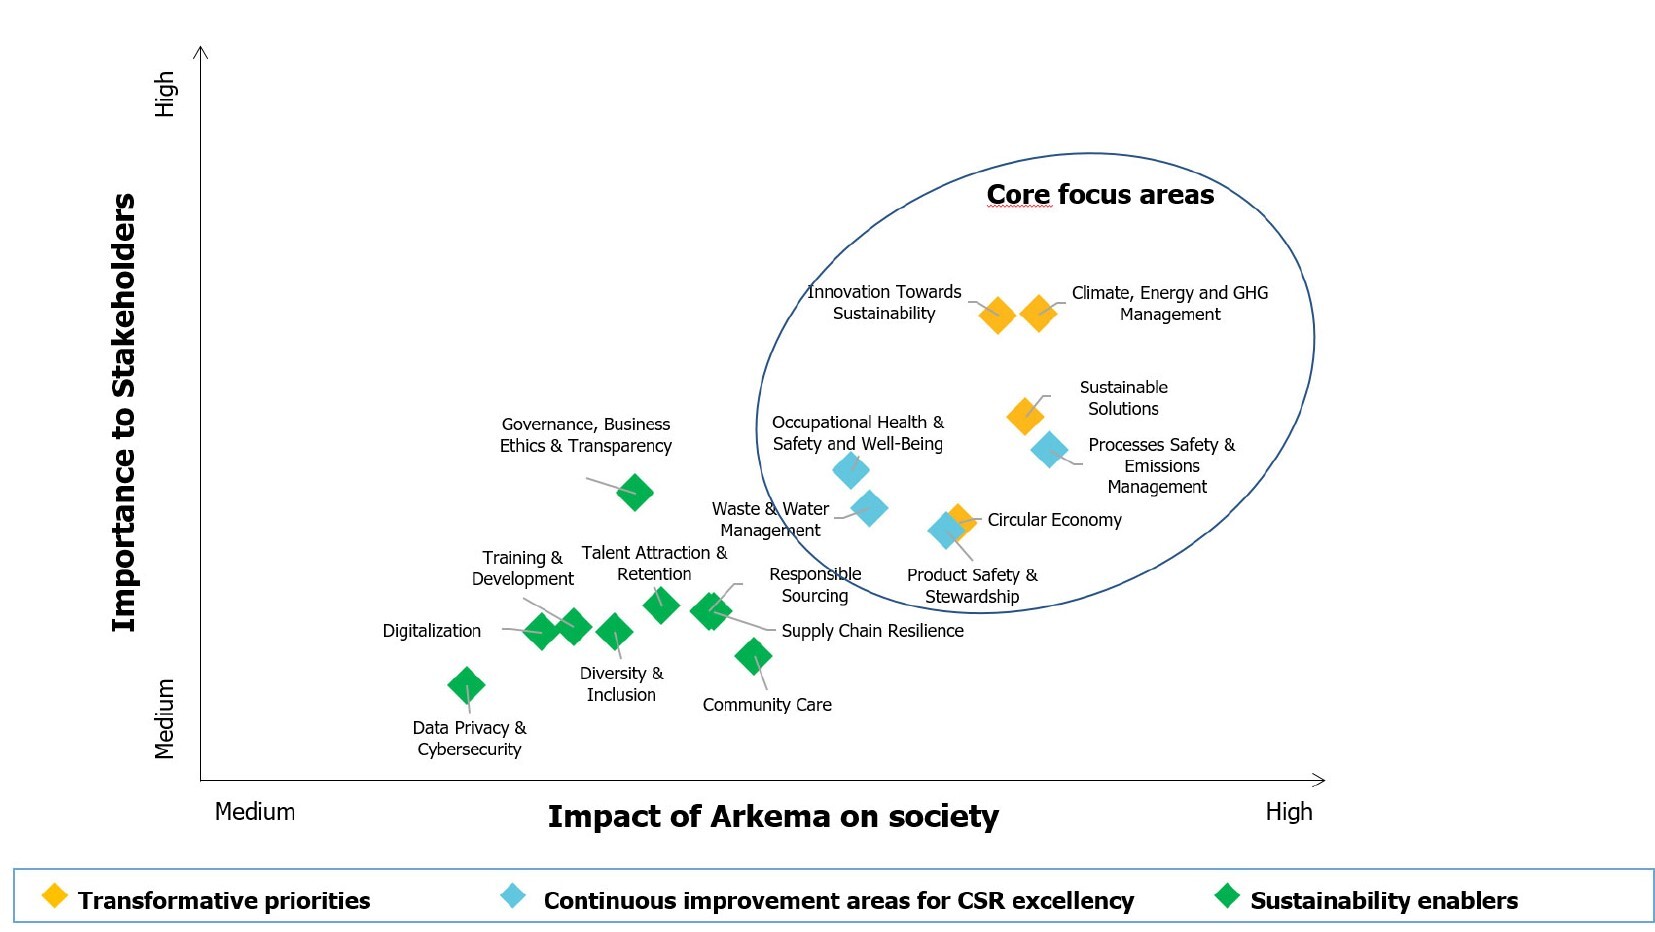 The graph represents the 17 key materials issues. On the x-axis, the impact of Arkema on society, ranging from medium to high. On the vertical axis, the importance to stakeholders, ranging from medium to high. Transformative priorities and continuous improvement areas for CSR excellence are the core focus areas identified.